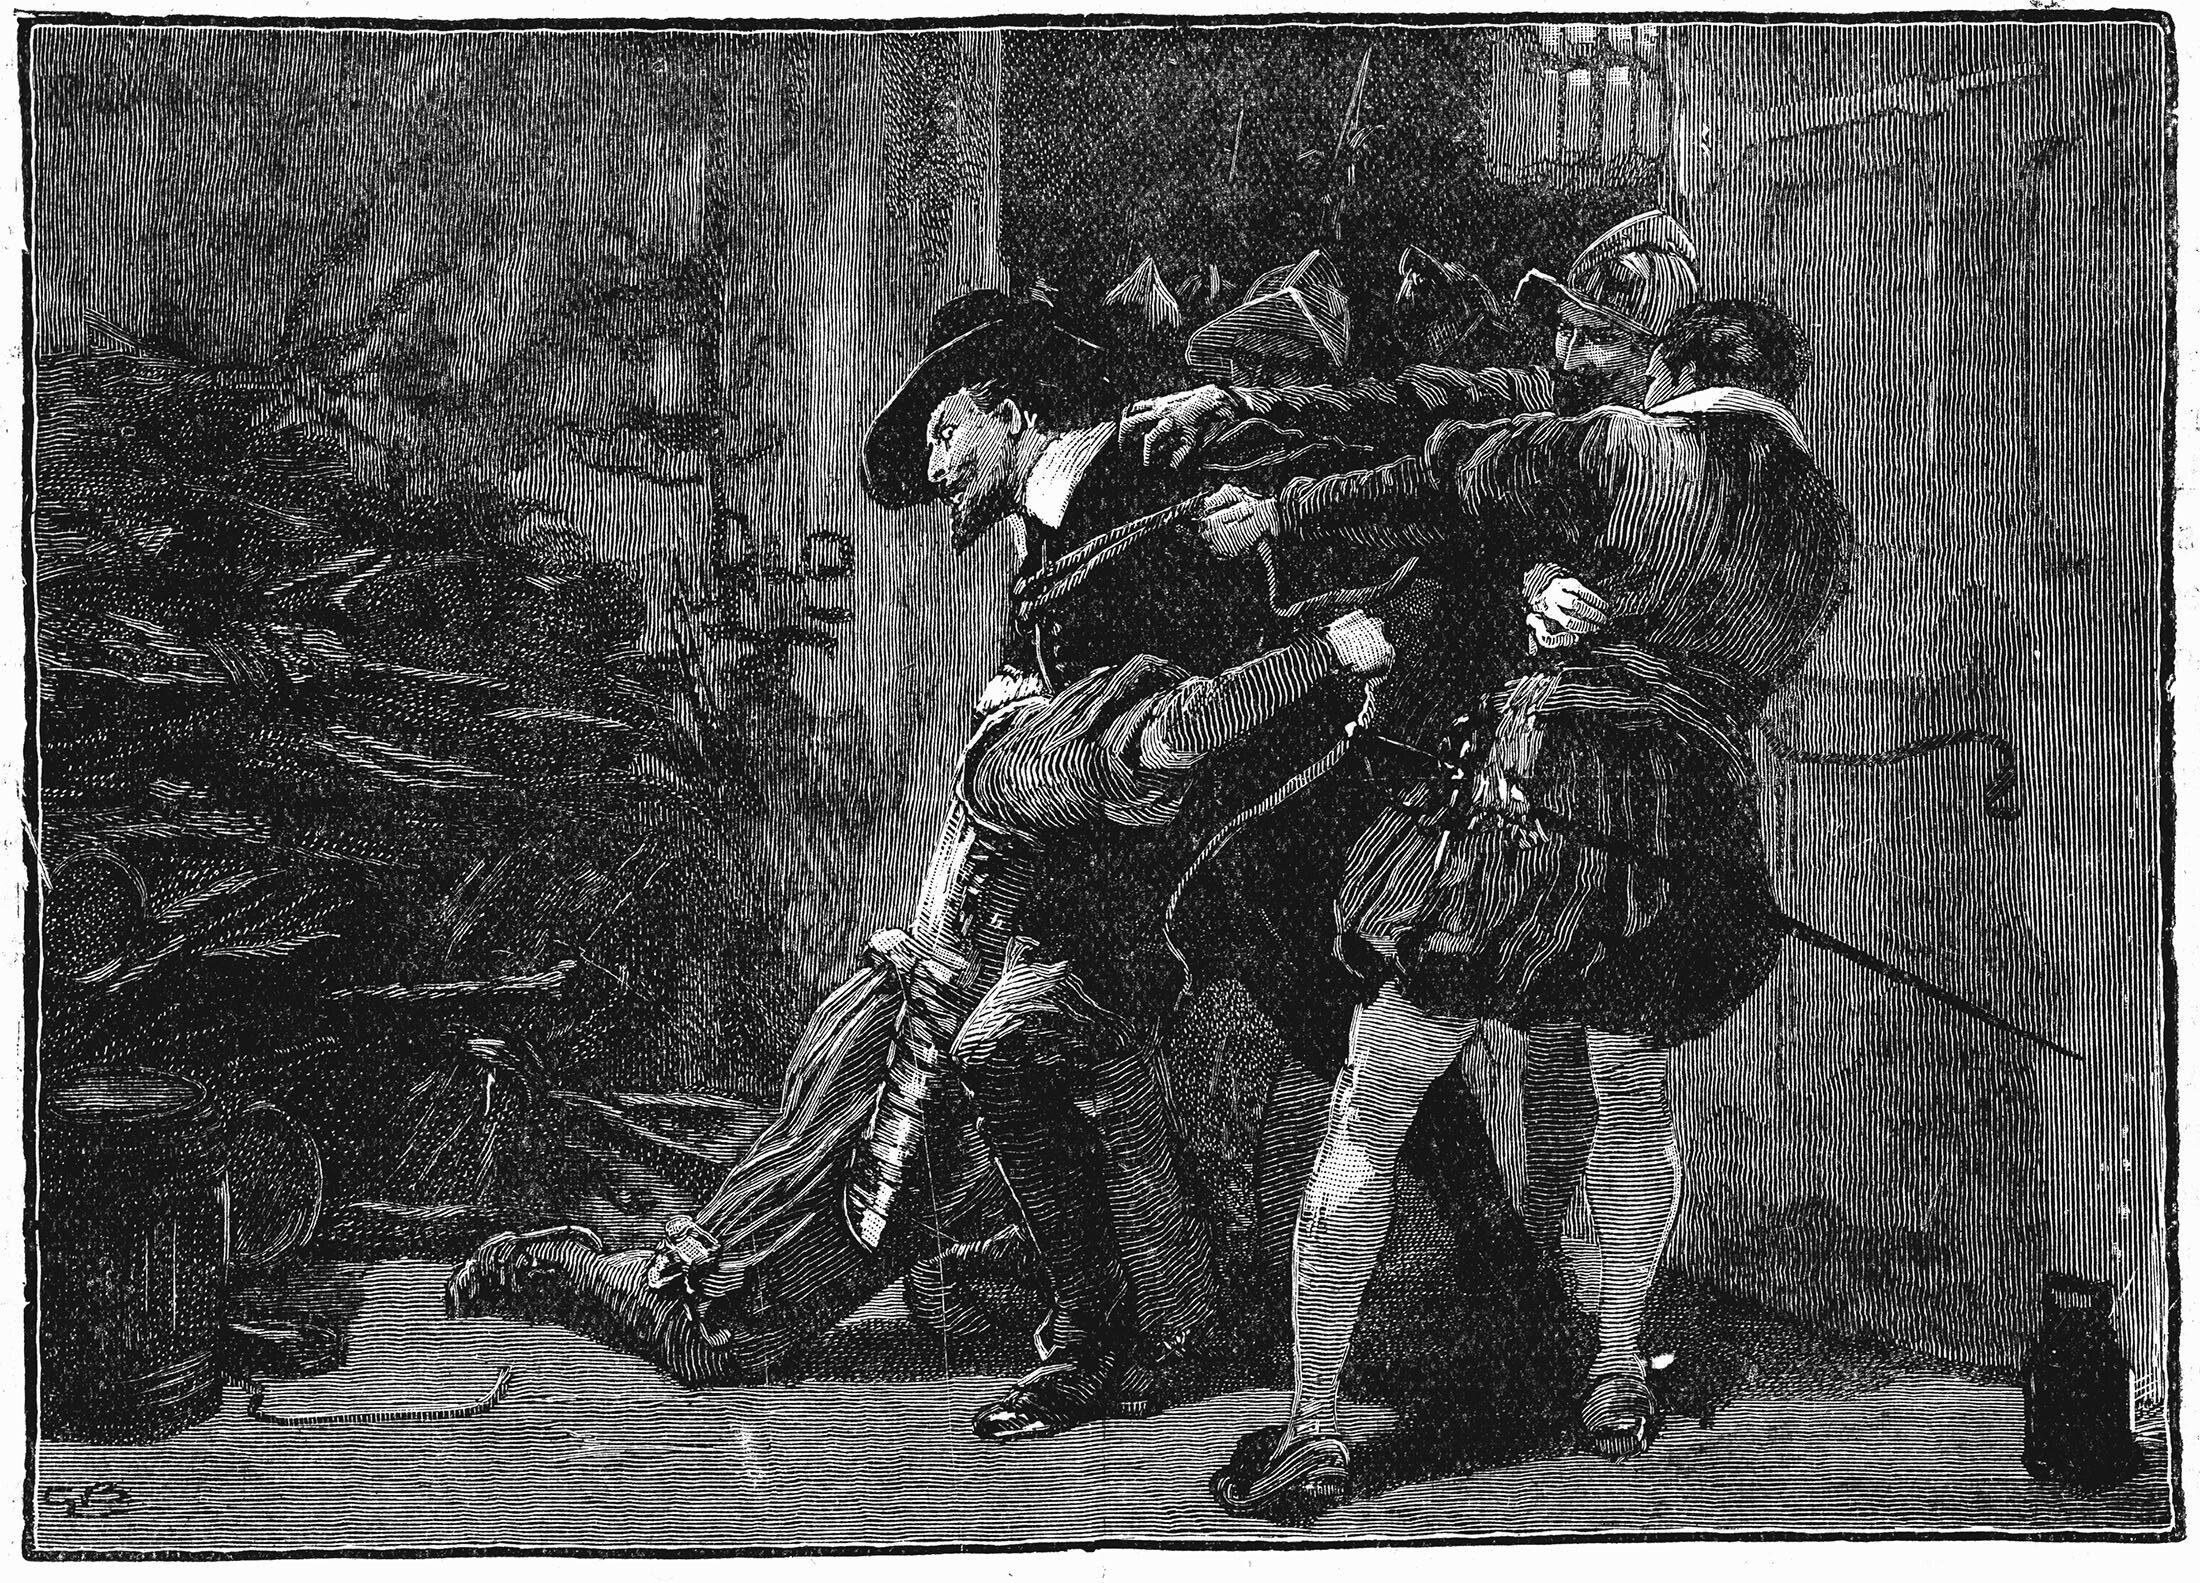 A 19th-century wood engraving shows the arrest of Guy Fawkes in the cellars of Parliament. (Getty Images)